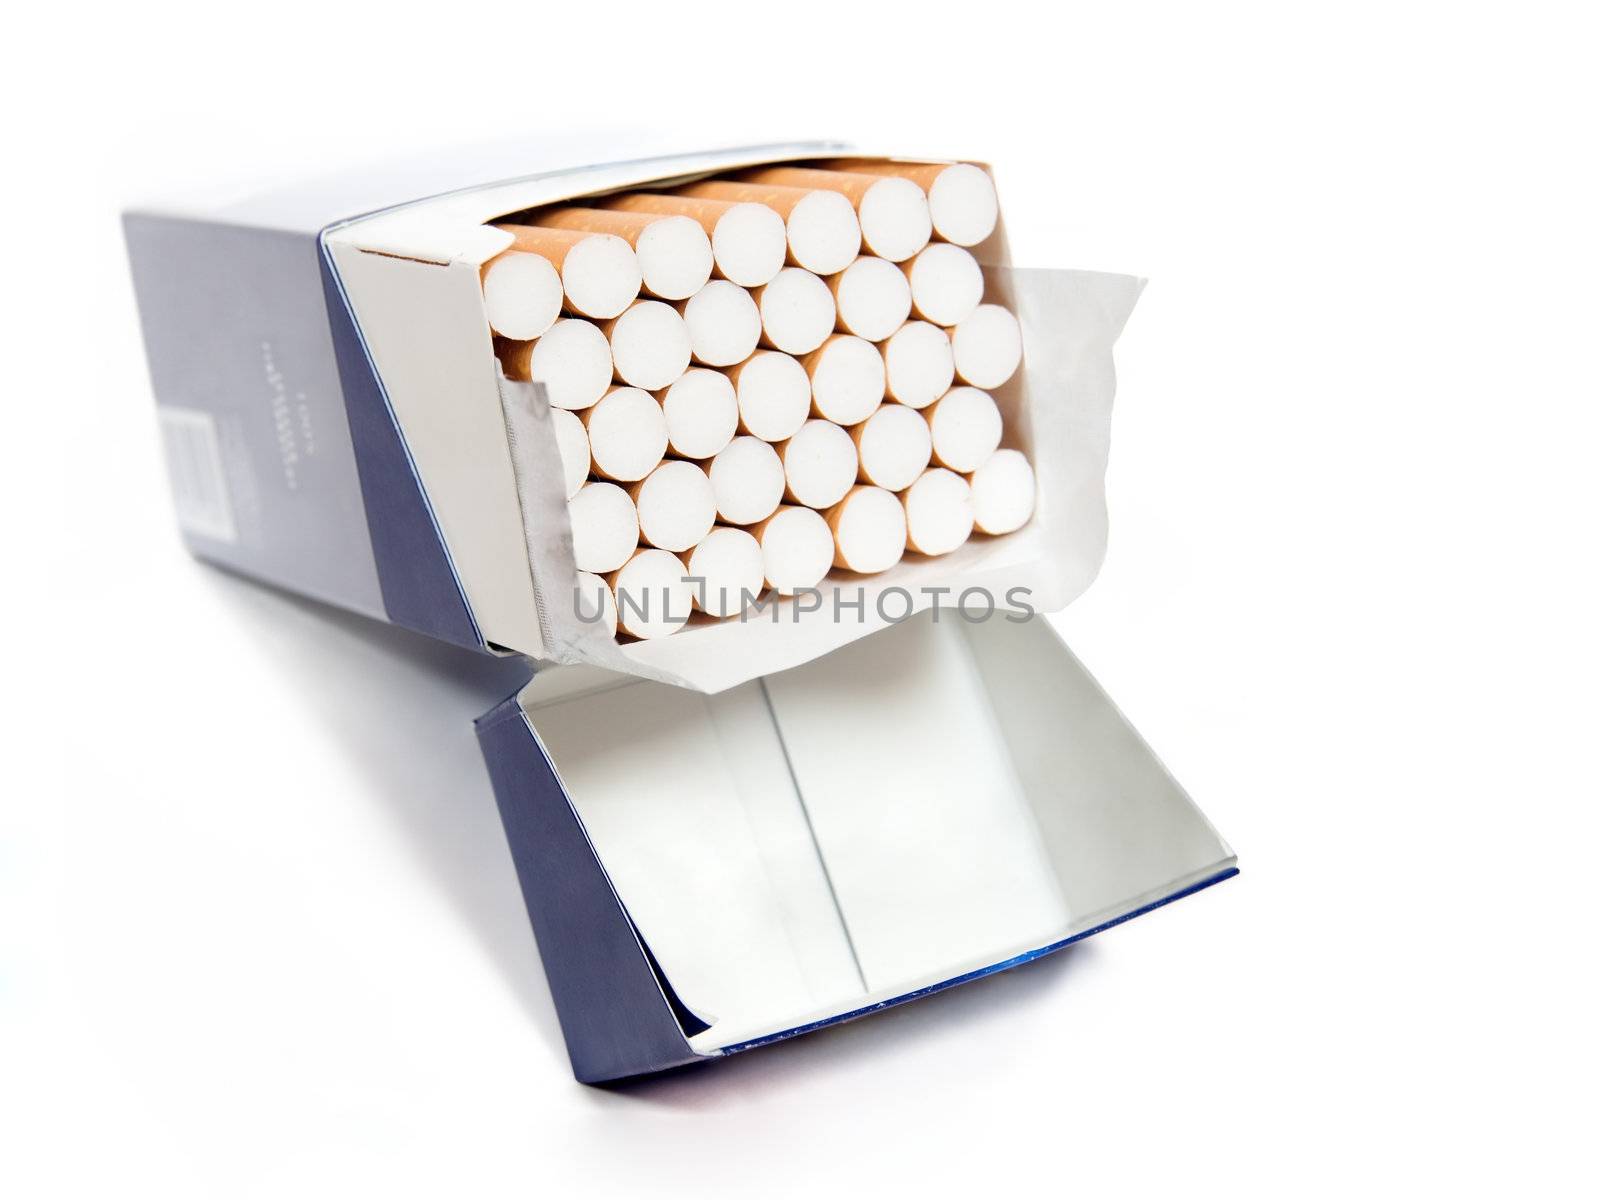 Big pack of cigarettes isolated on white background